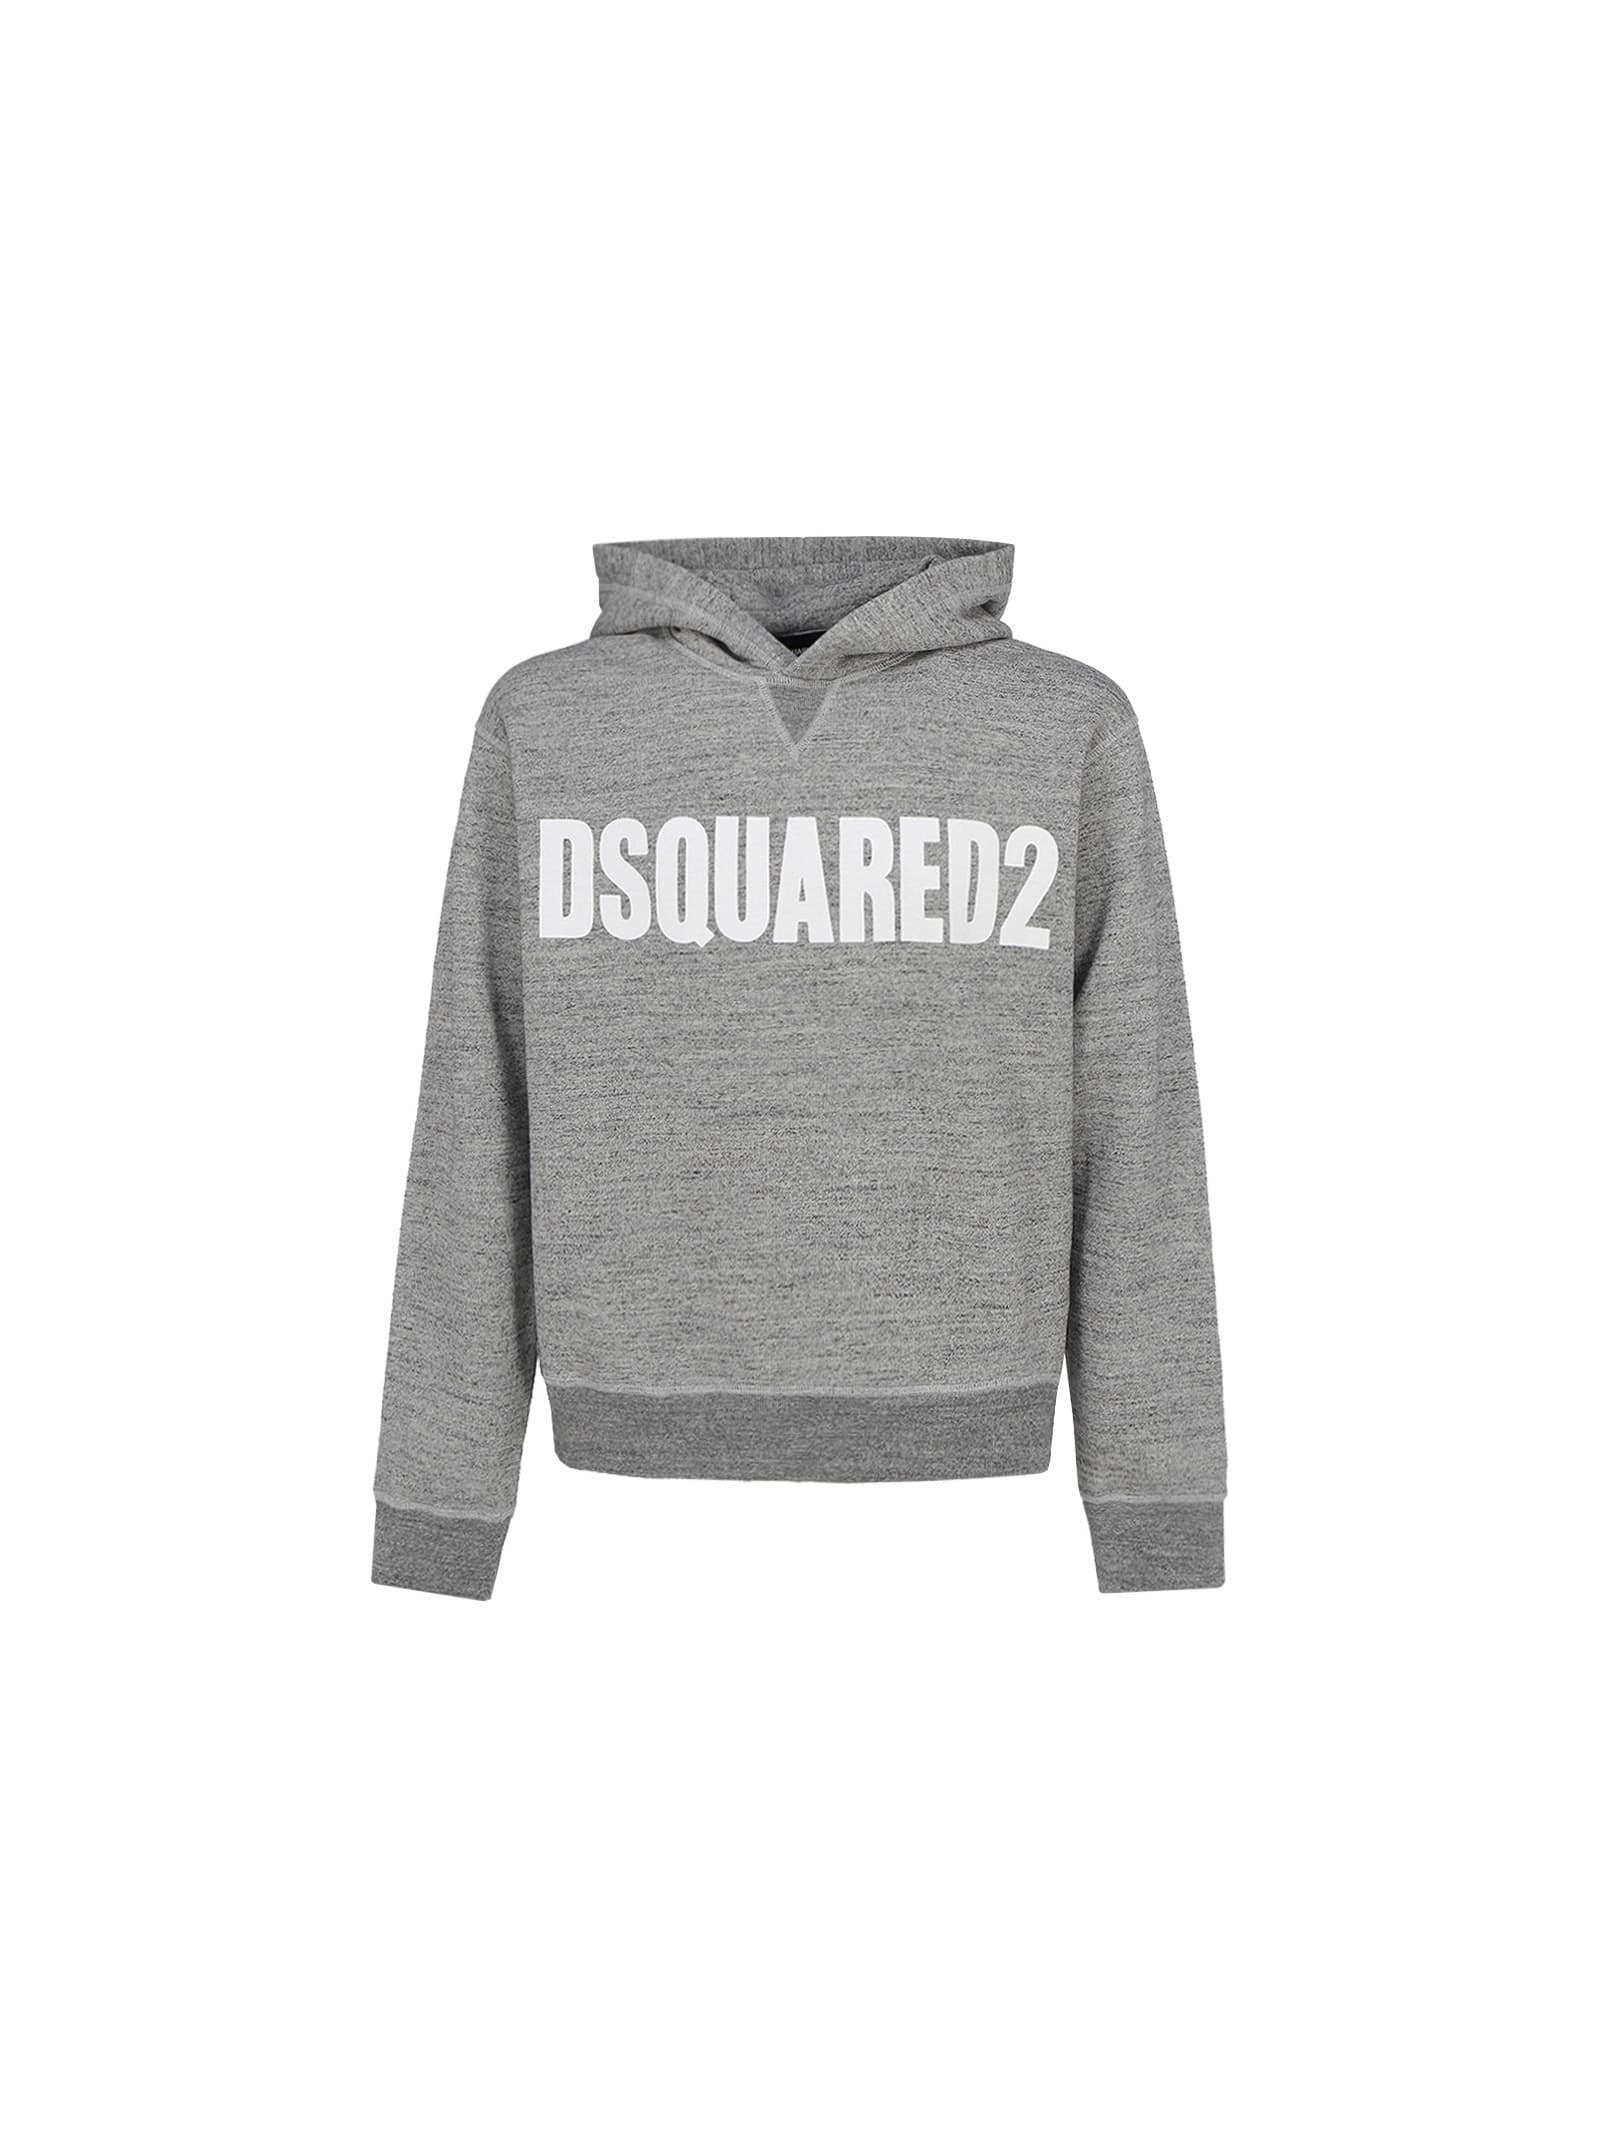 dsquared2 hoodie sale